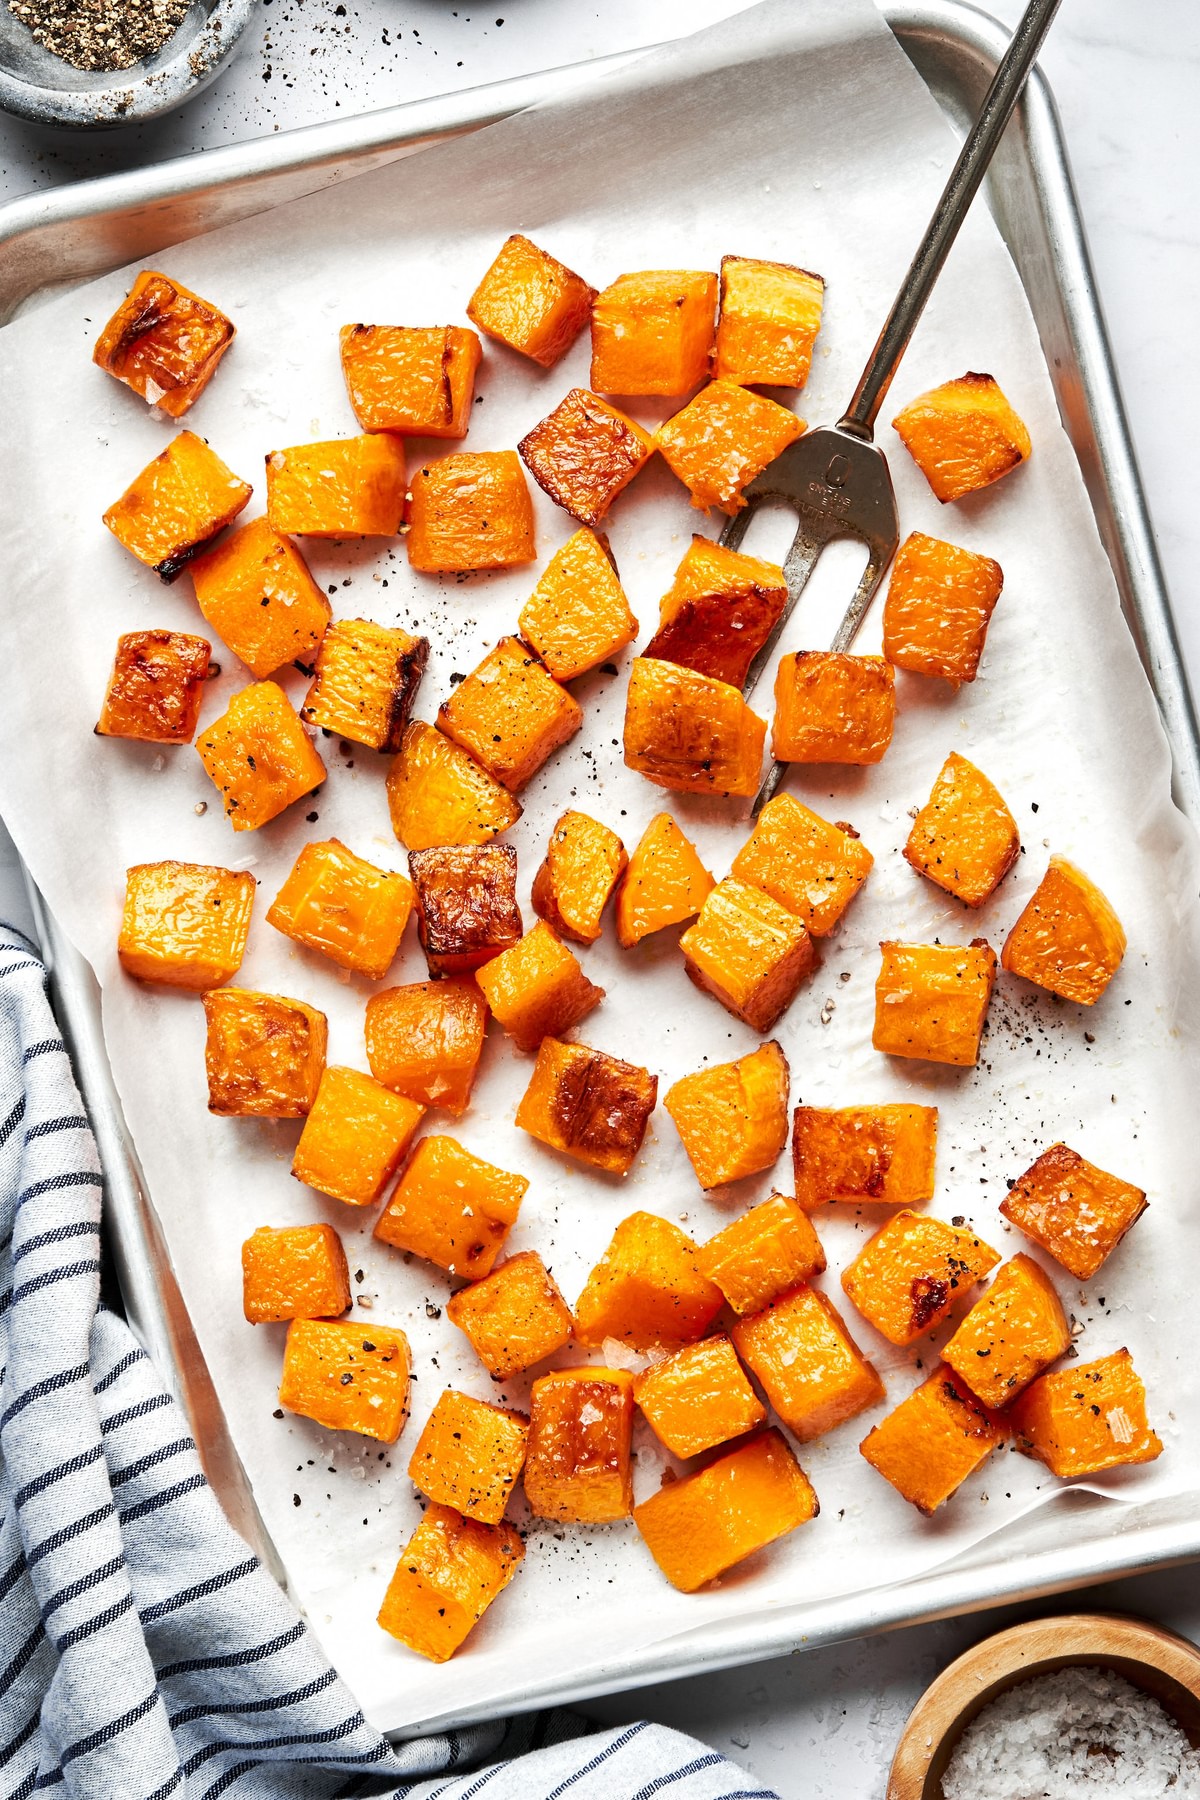 cubed roasted butternut squash seasoned with olive oil, salt and pepper on a baking sheet with a serving fork